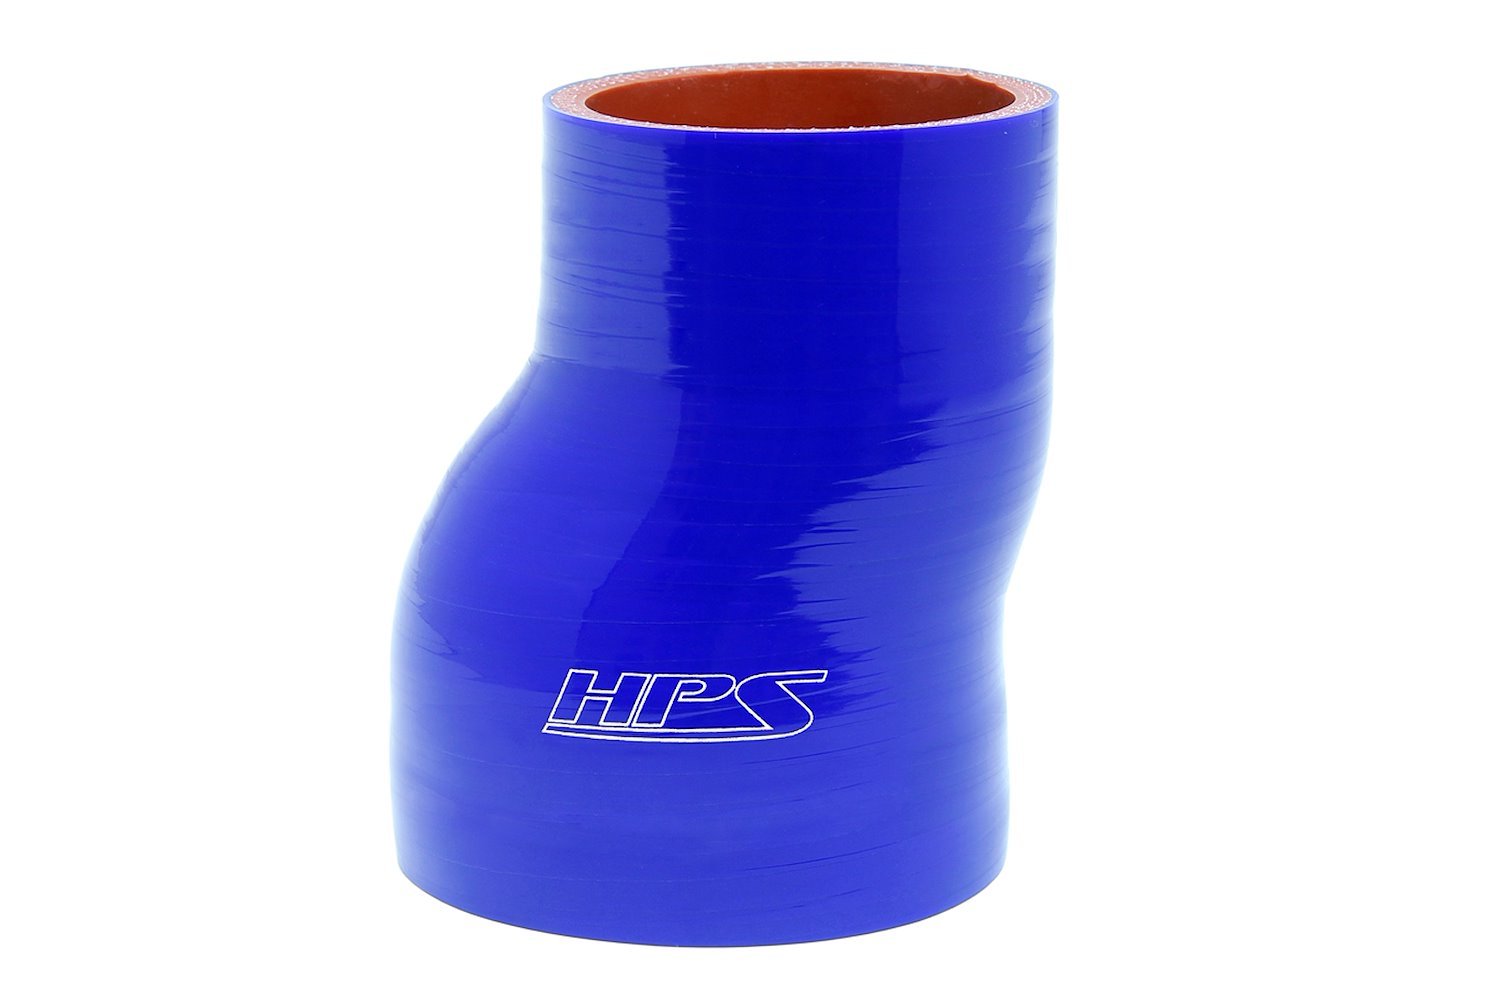 HTSOR-250-300-L6-BLUE Silicone Offset Reducer Hose, High-Temp Reinforced, 2-1/2 in. - 3 in. ID, 6 in. Long, Blue